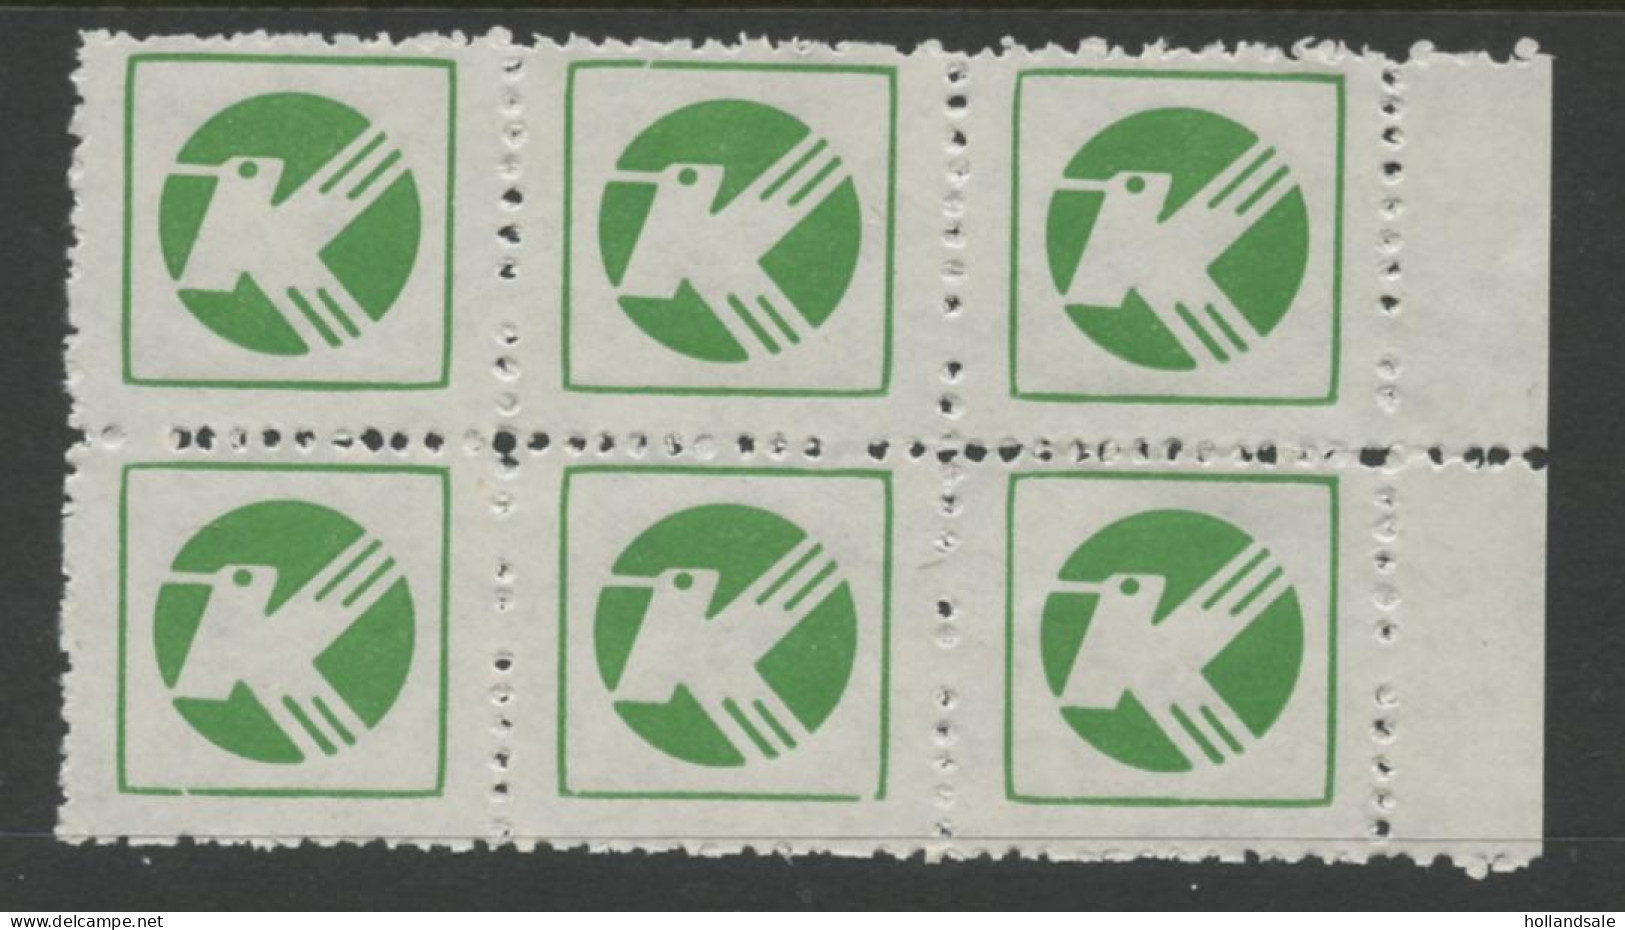 CHINA PRC / ADDED CHARGE - Beichuan, Sichuan Prov. Block Of 6. D&O 24-0261) - Postage Due